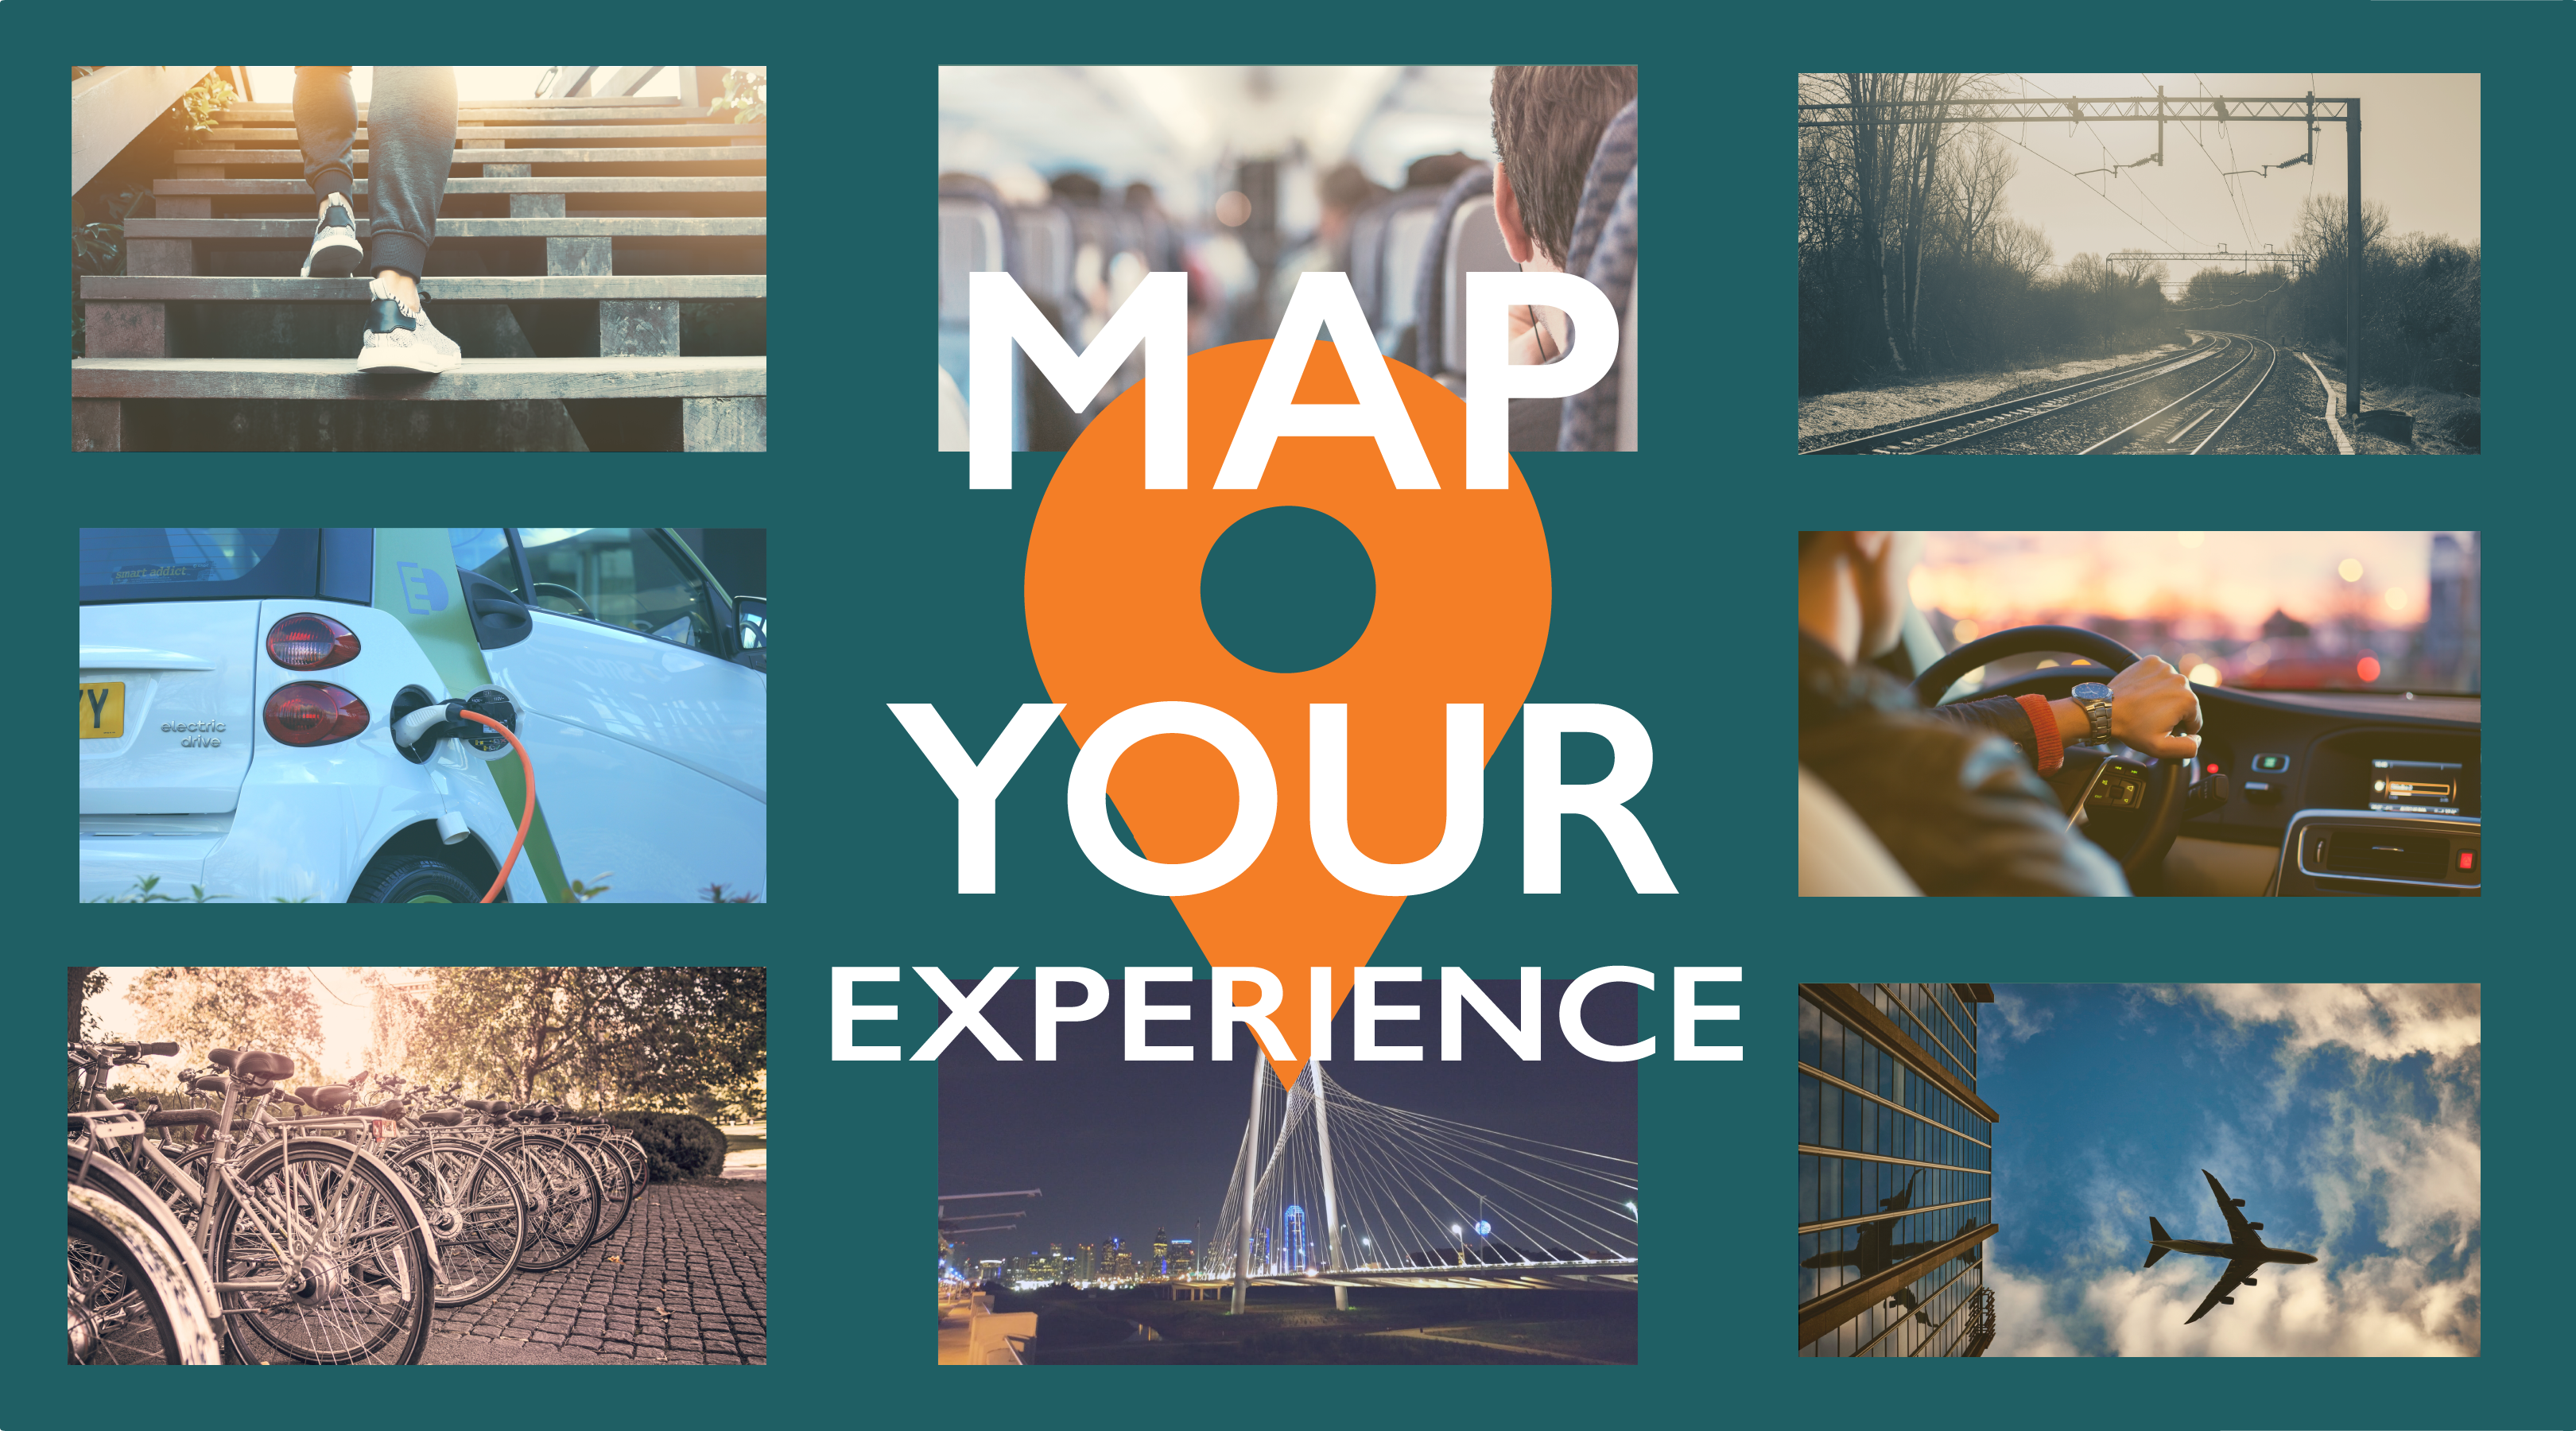 This is an image linking to NCTCOG's interactive mapping tool, "Map your experience".